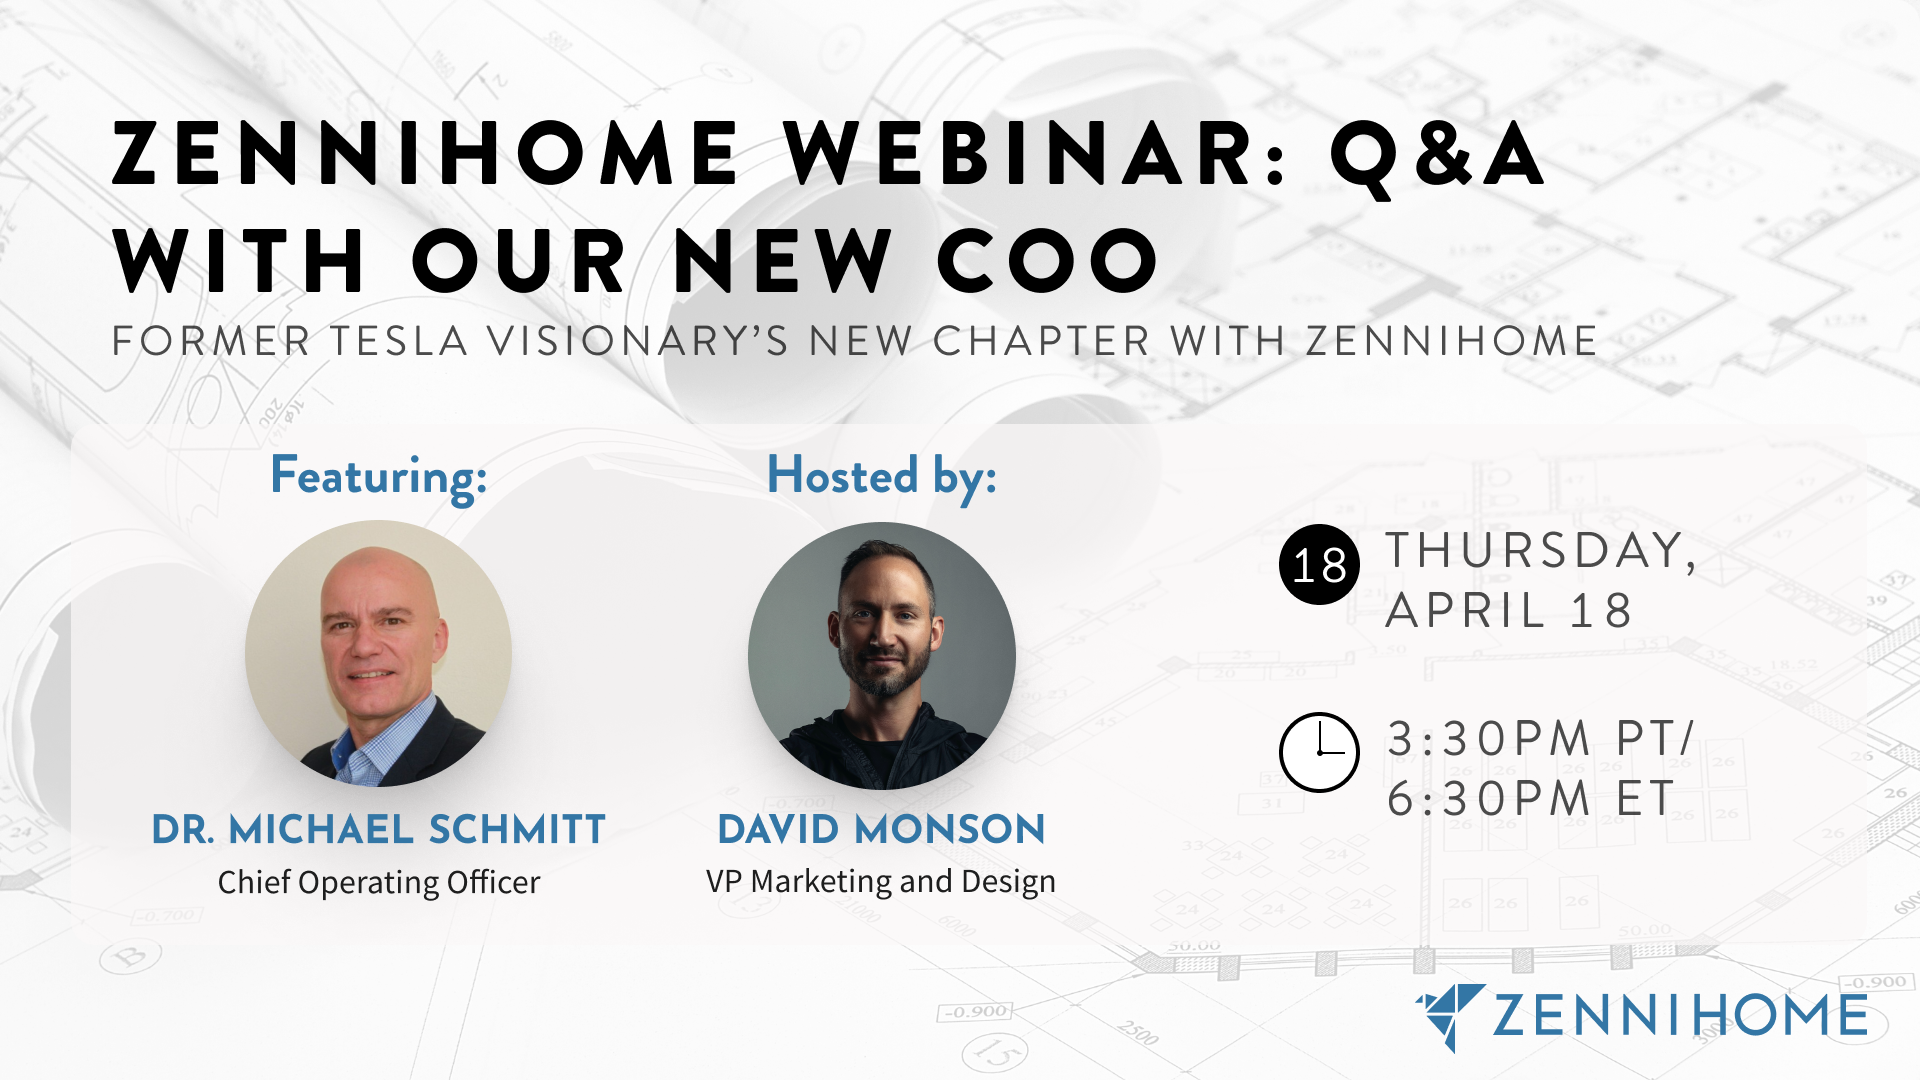 ZenniHome Webinar Q&A with our new COO 🎉